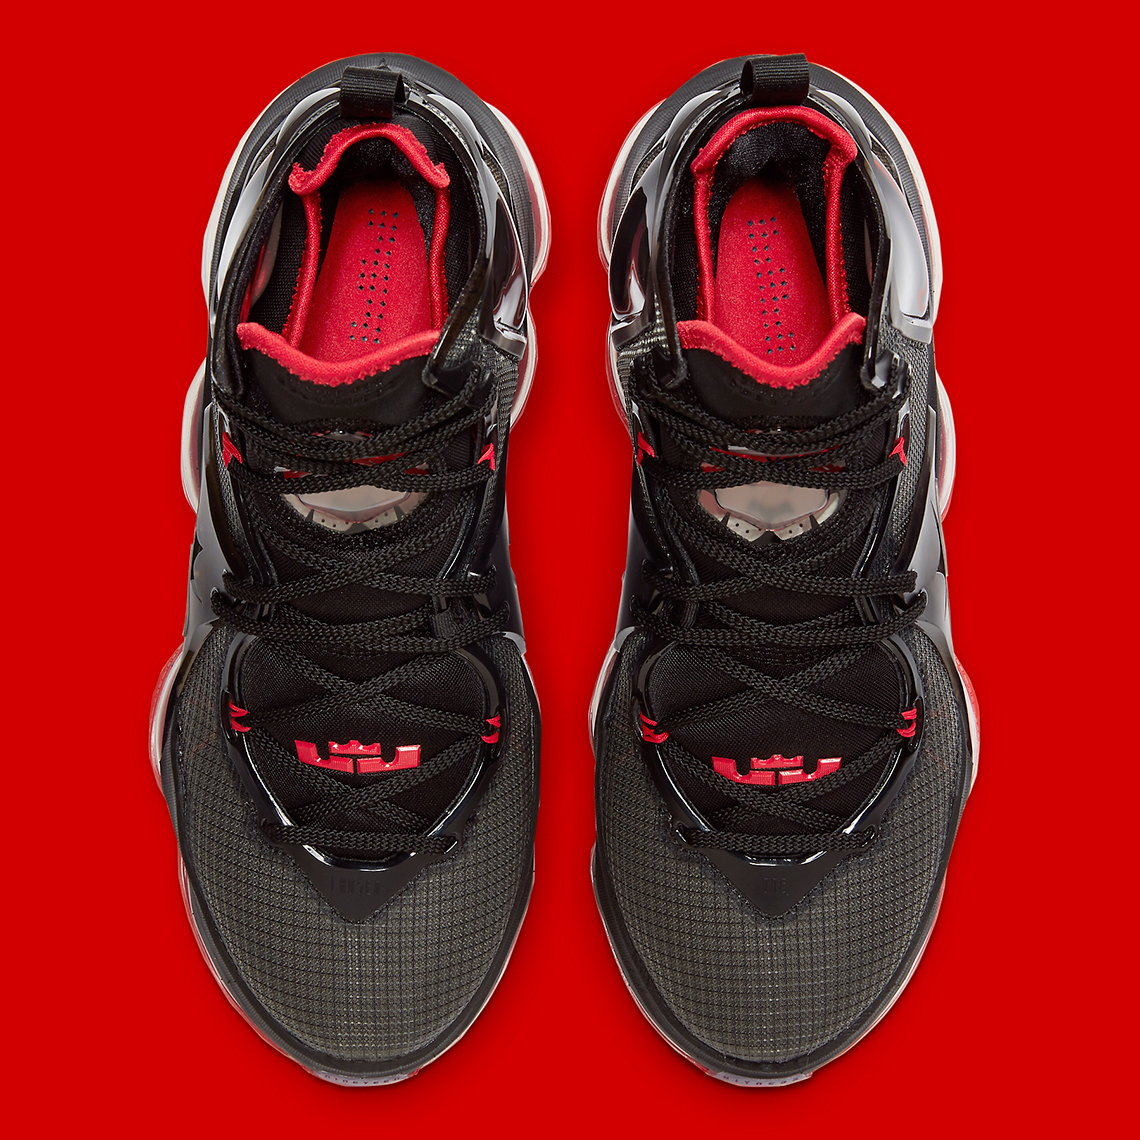 Ike Lebron 19 Black Red Dc9340 001 Releases Date 7